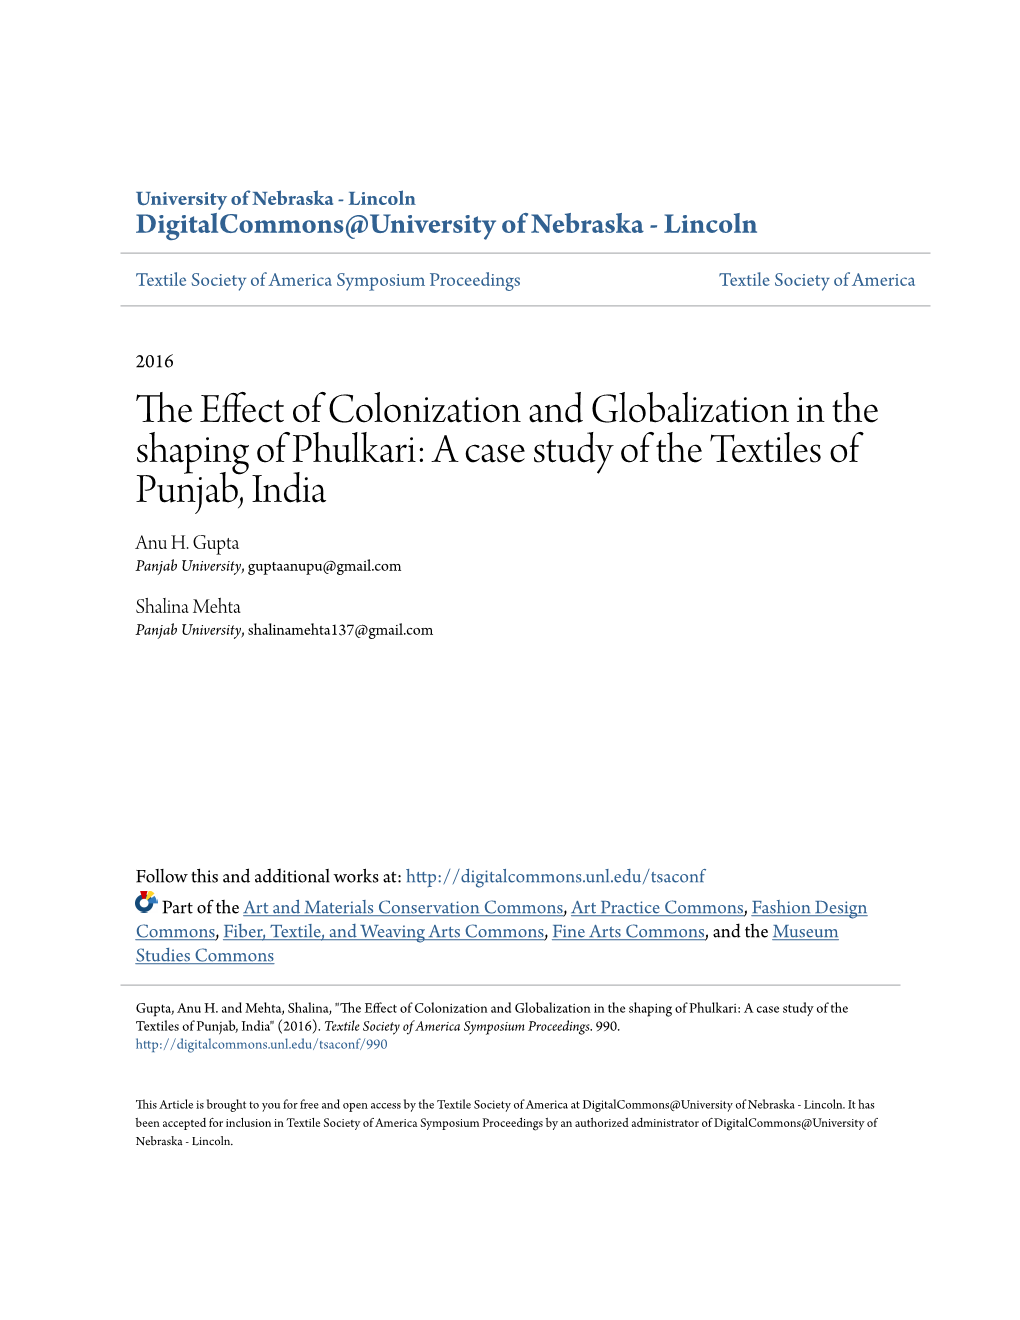 The Effect of Colonization and Globalization in the Shaping of Phulkari: a Case Study of the Textiles of Punjab, India" (2016)